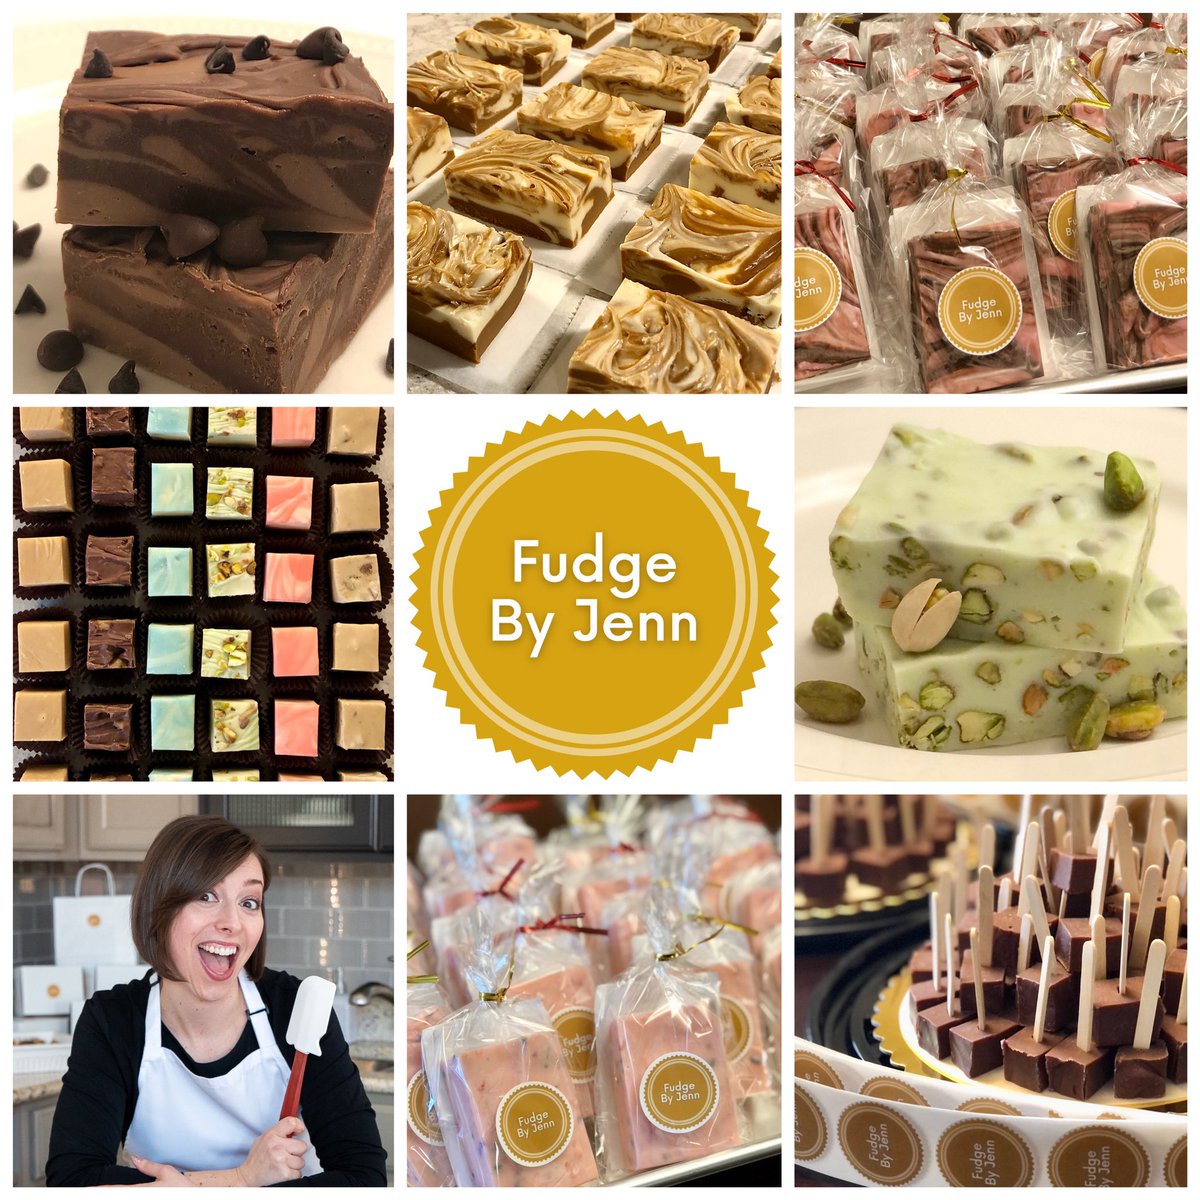 Today is National #MomandPop Business Owners Day! I’m Jenn and I operate my business, Fudge By Jenn in #WestChesterOhio. 

#FudgeByJenn is premium, small-batch artisan #fudge that will blow your mind!

Learn more about me and my #business at fudgebyjenn.com

#Cincinnati